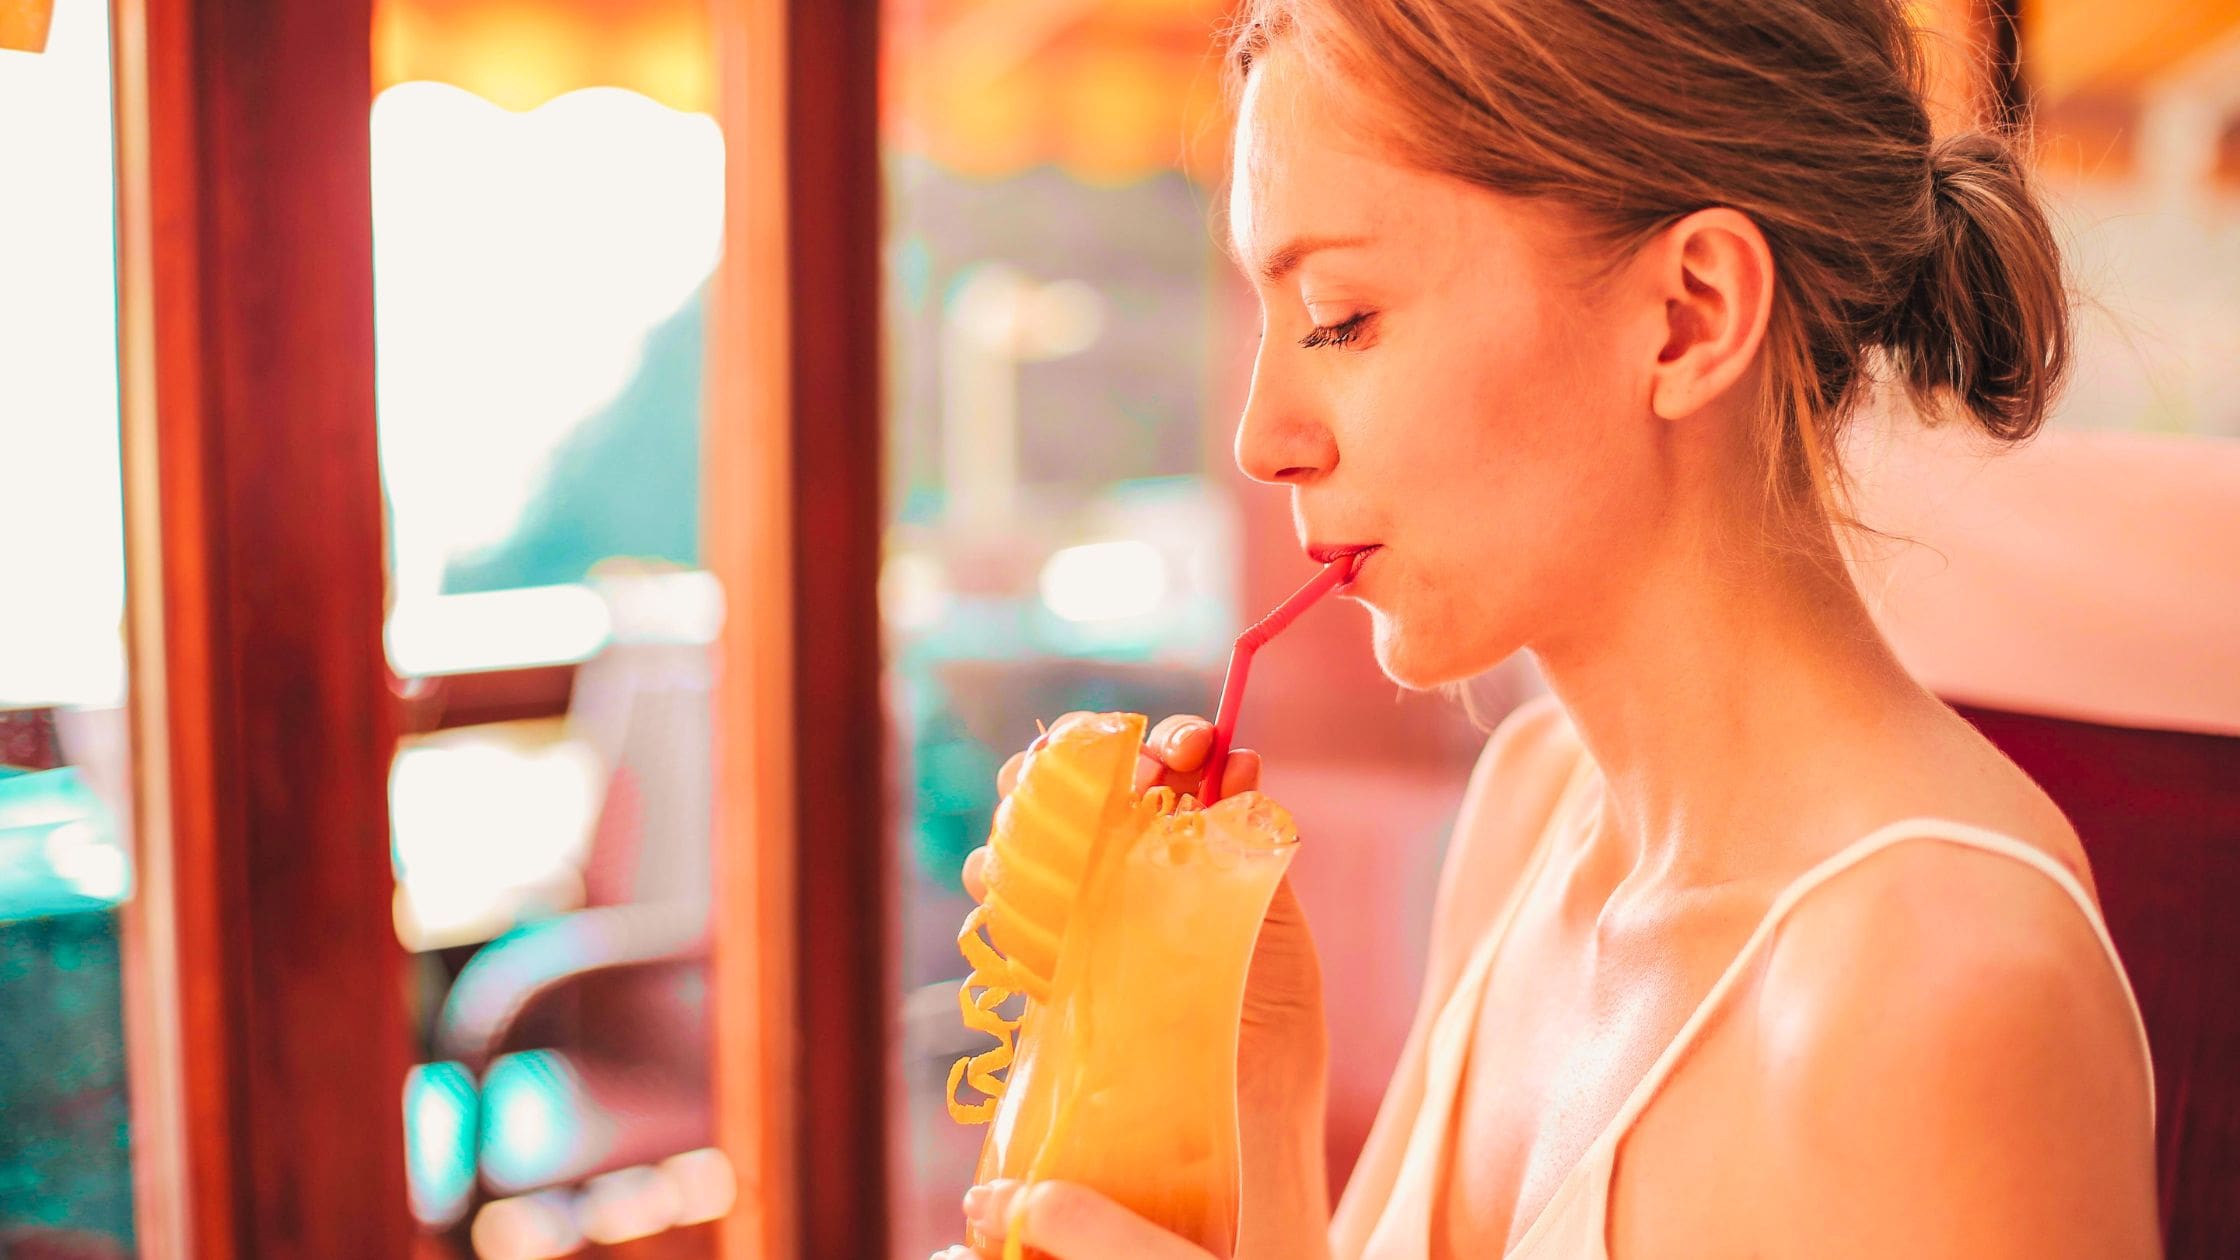 Cool down with These Top 10 Summer Drinks